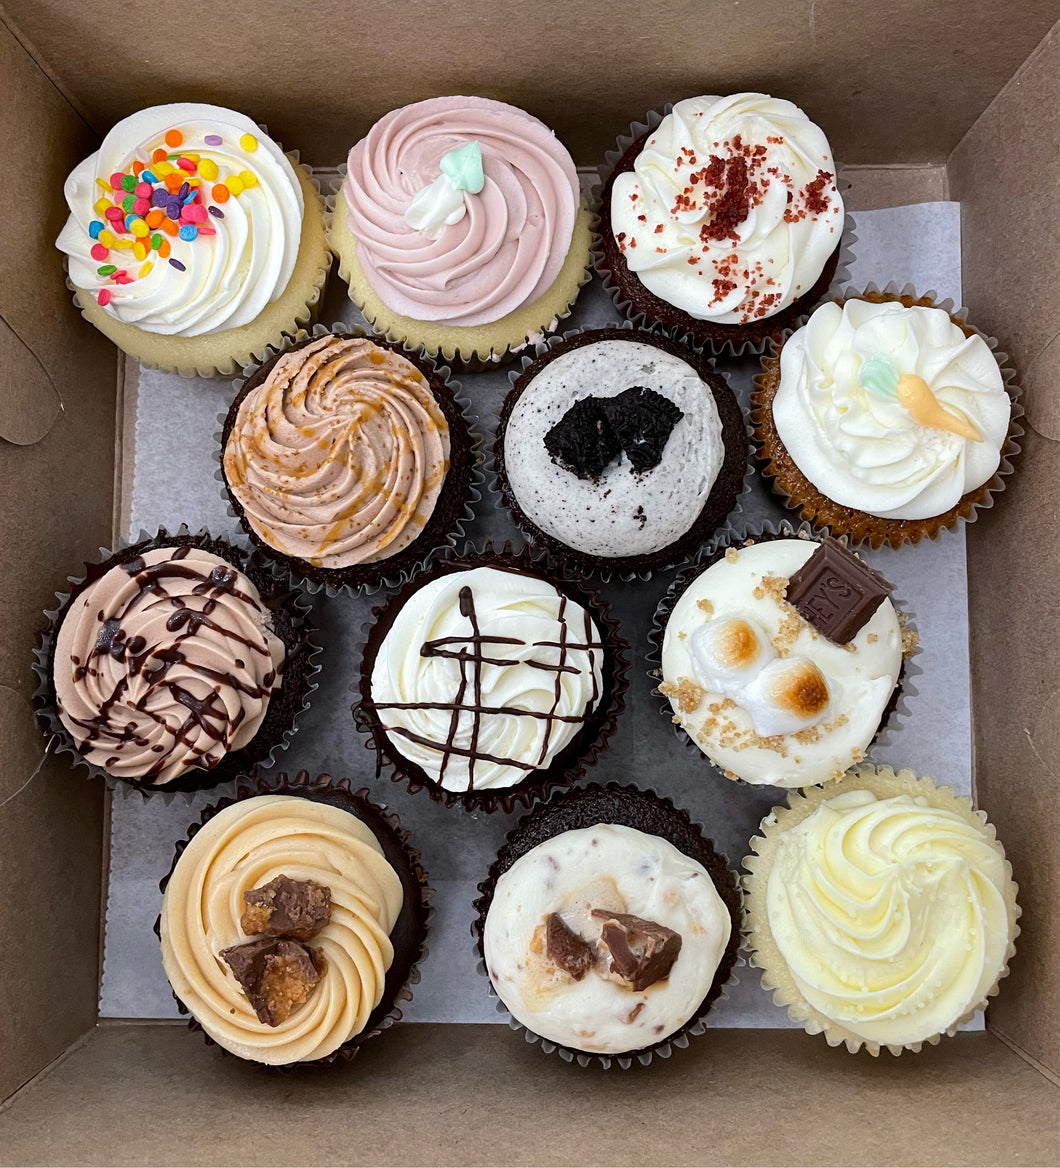 12 Assorted Cupcakes